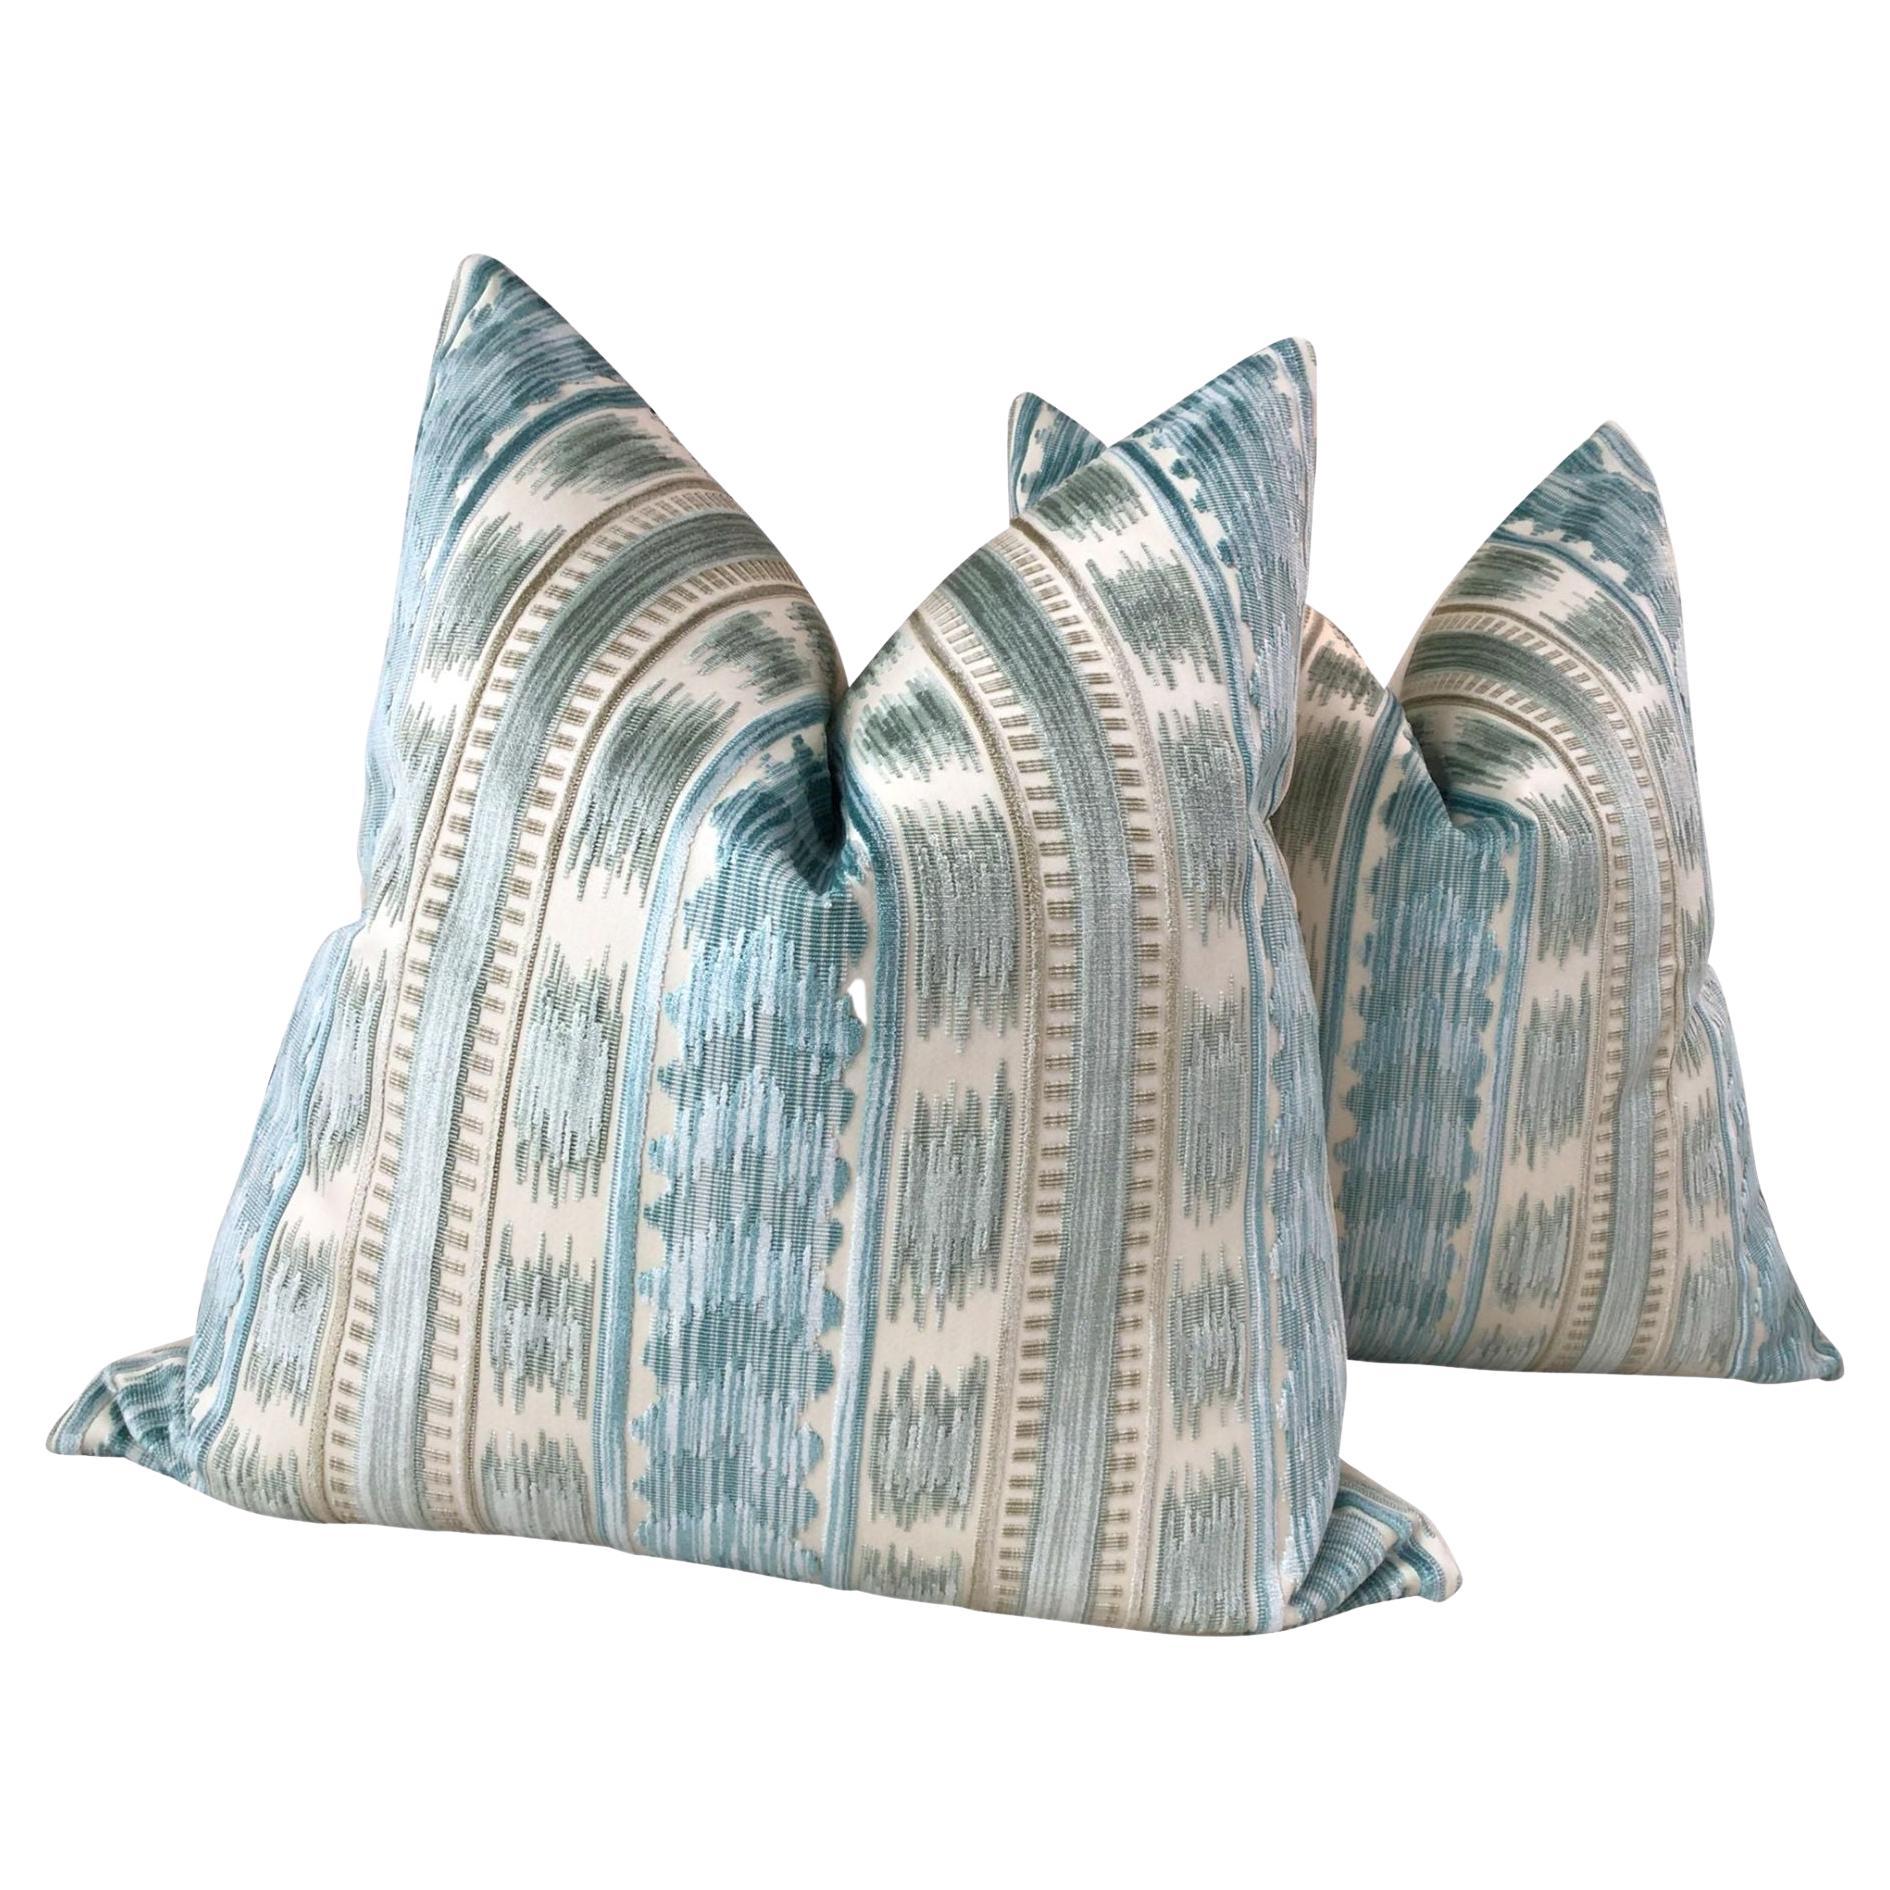 Brunschwig and Fils "Bayeaux" Velvet in Aqua Pillows- a Pair For Sale